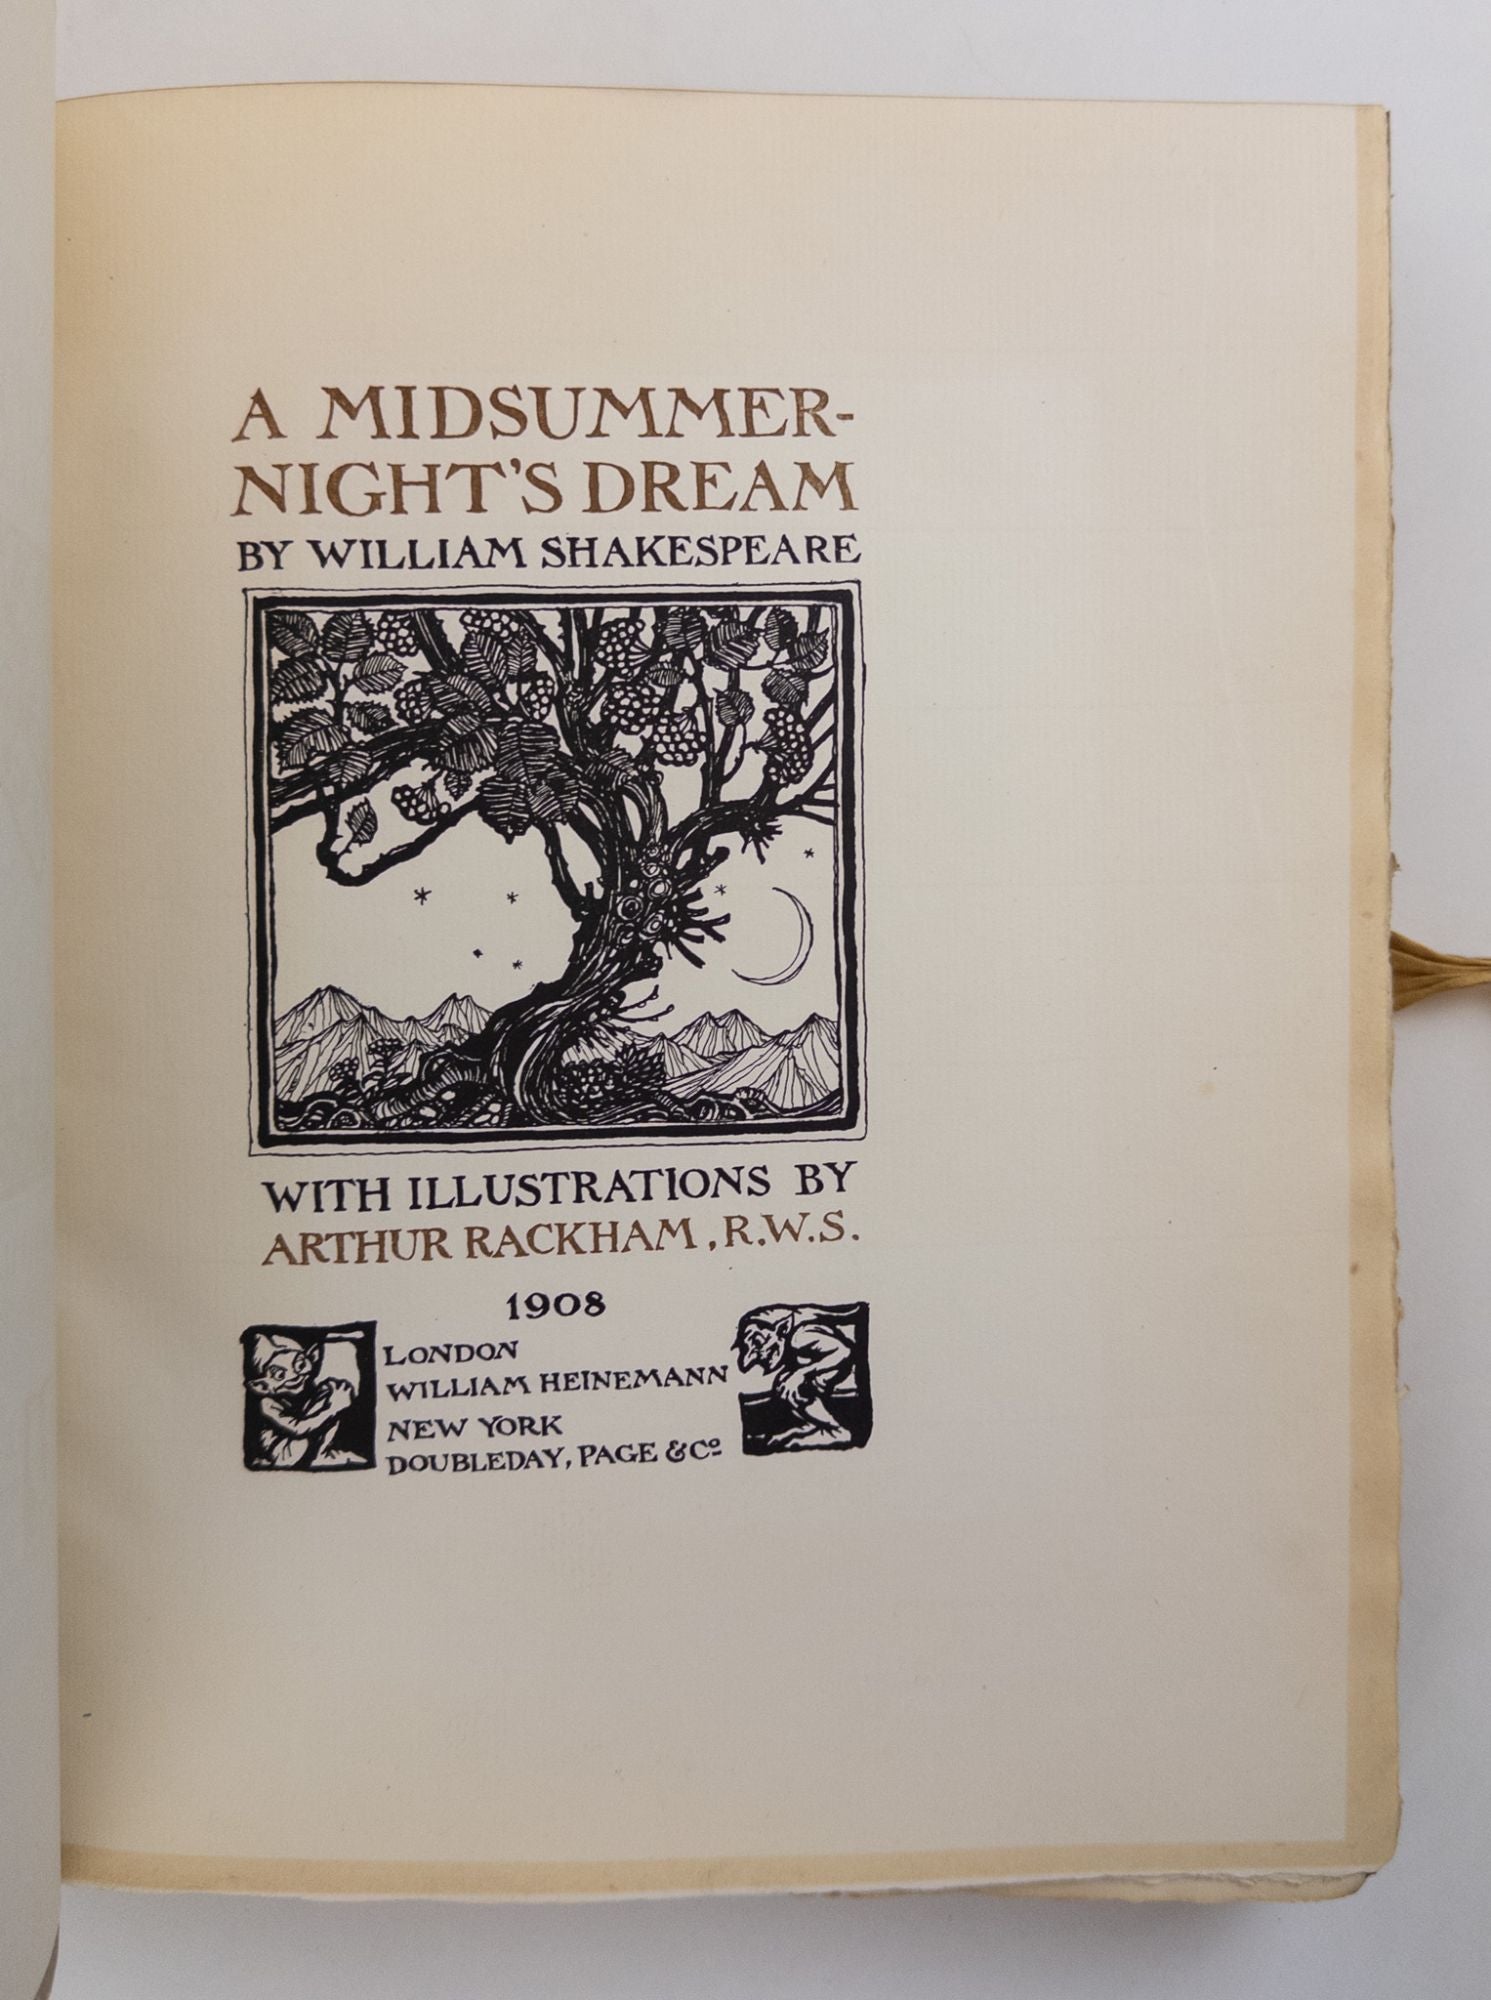 Product Image for A MIDSUMMER-NIGHT'S DREAM [Signed]